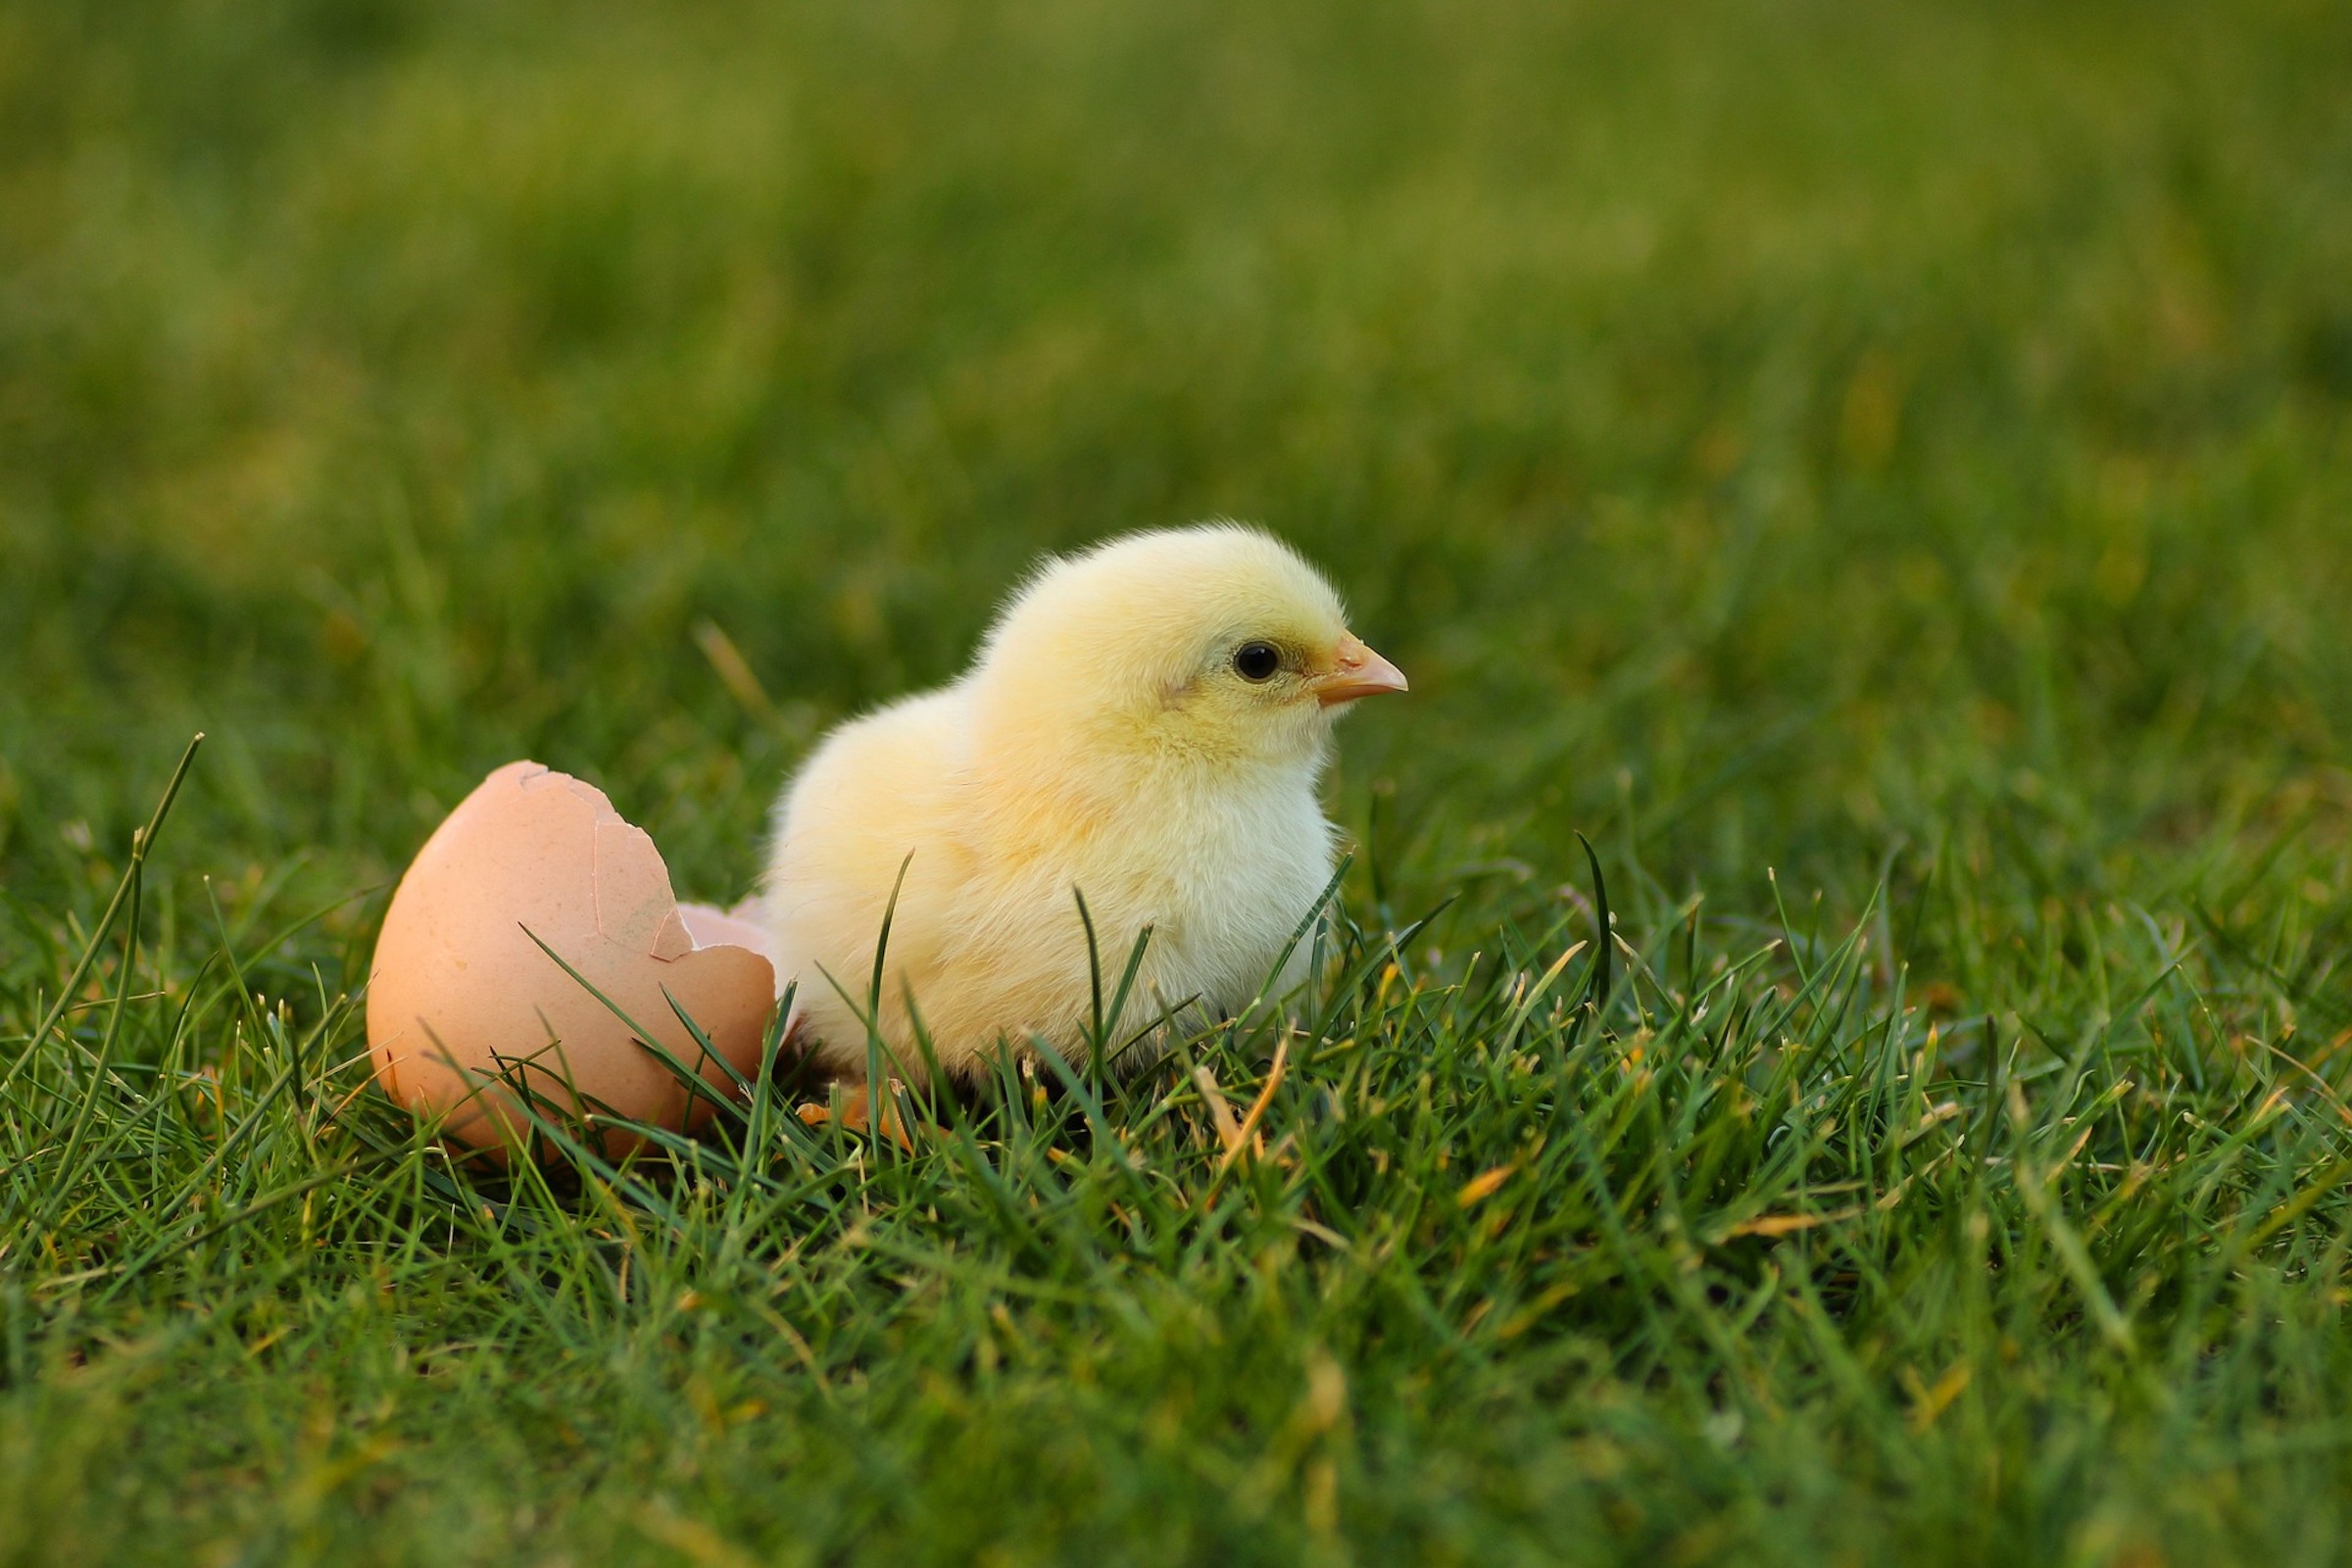 A baby chick sits in the grass next to a broken egg